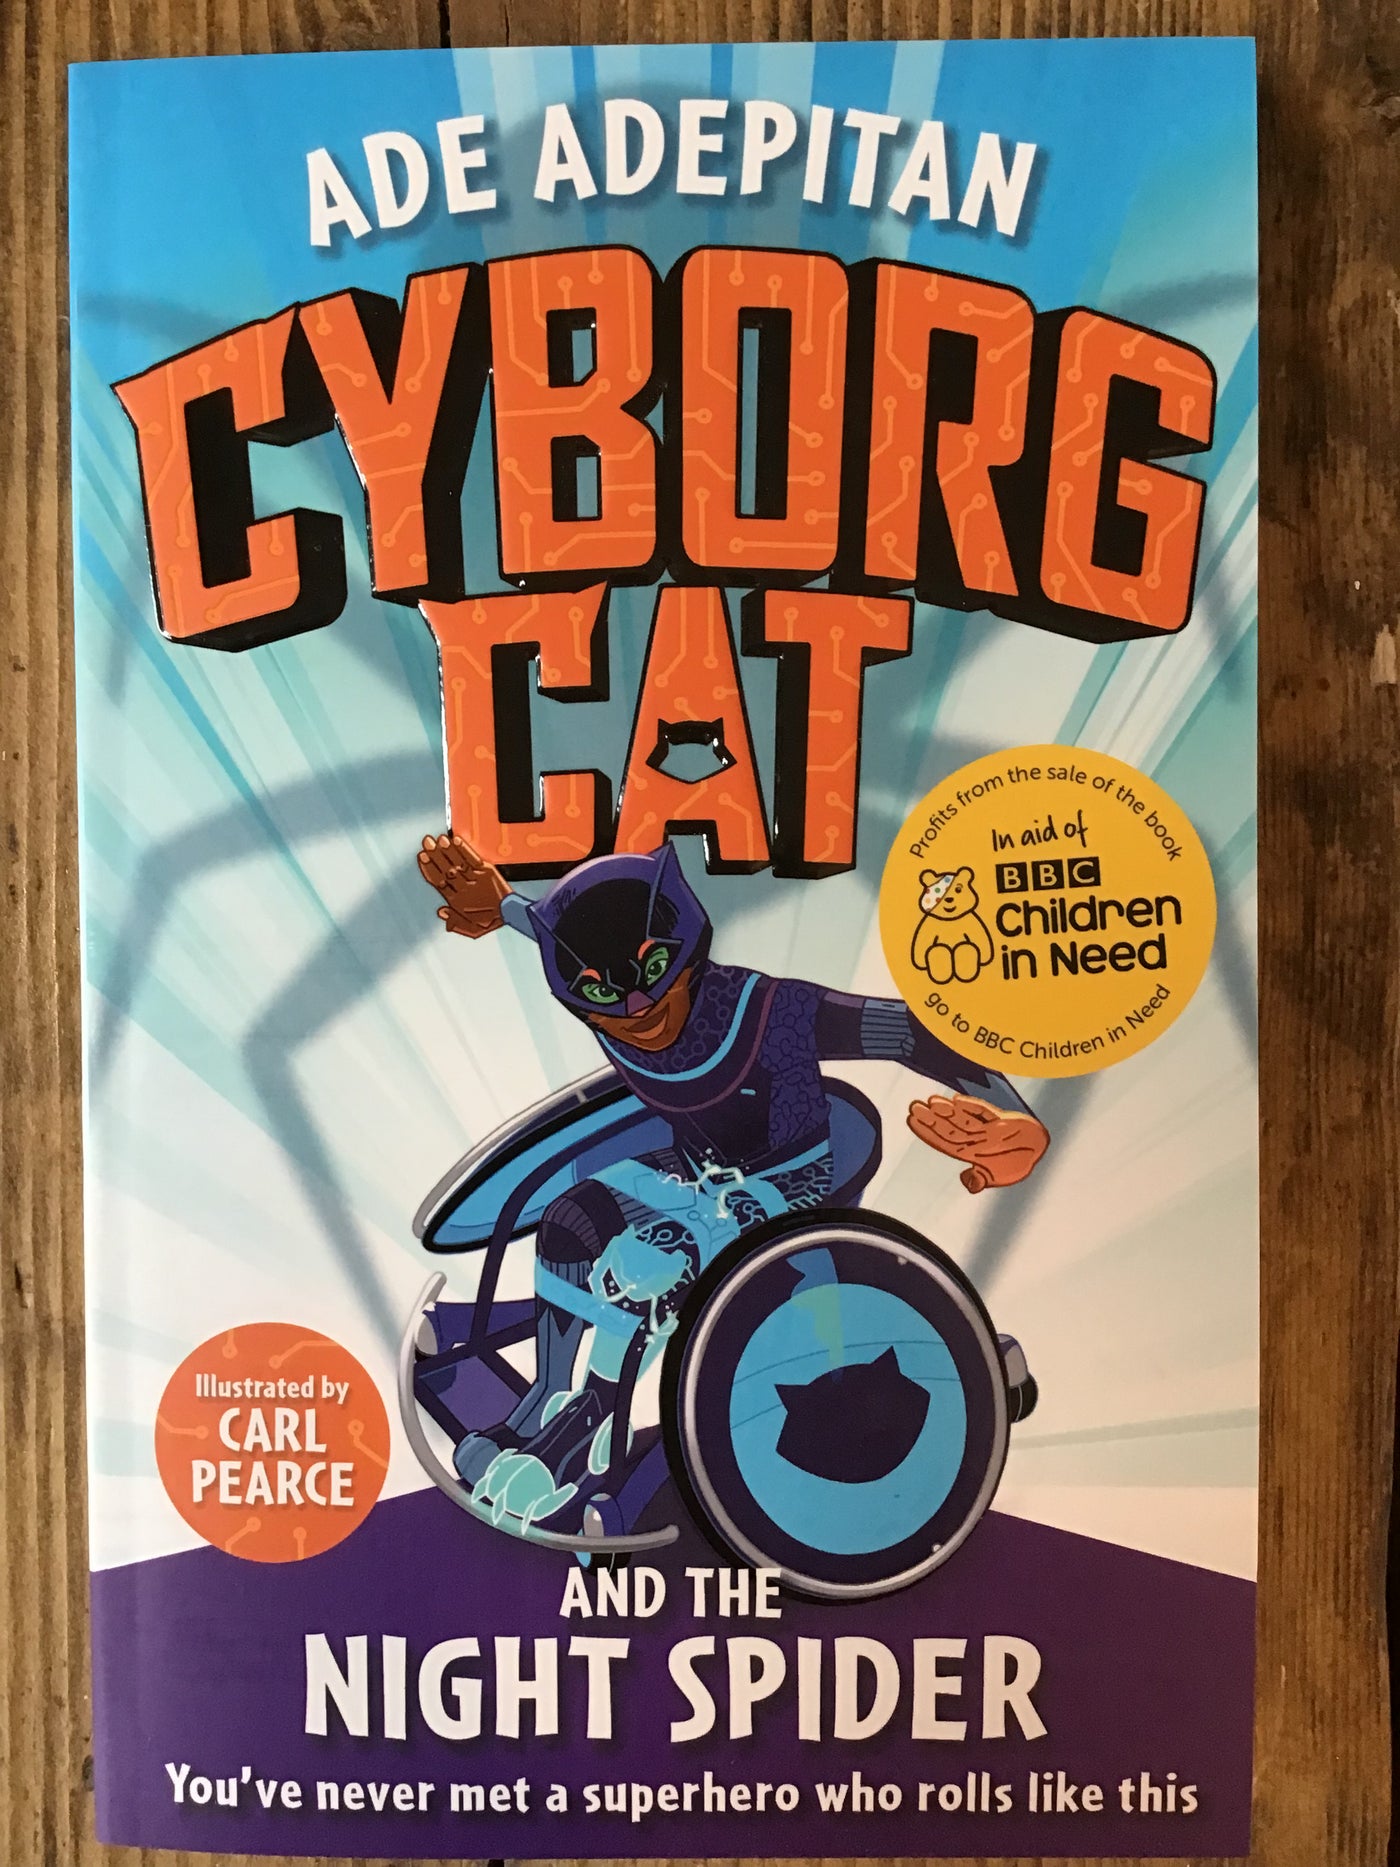 Cyborg Cat: The Mystery of the Night Spider